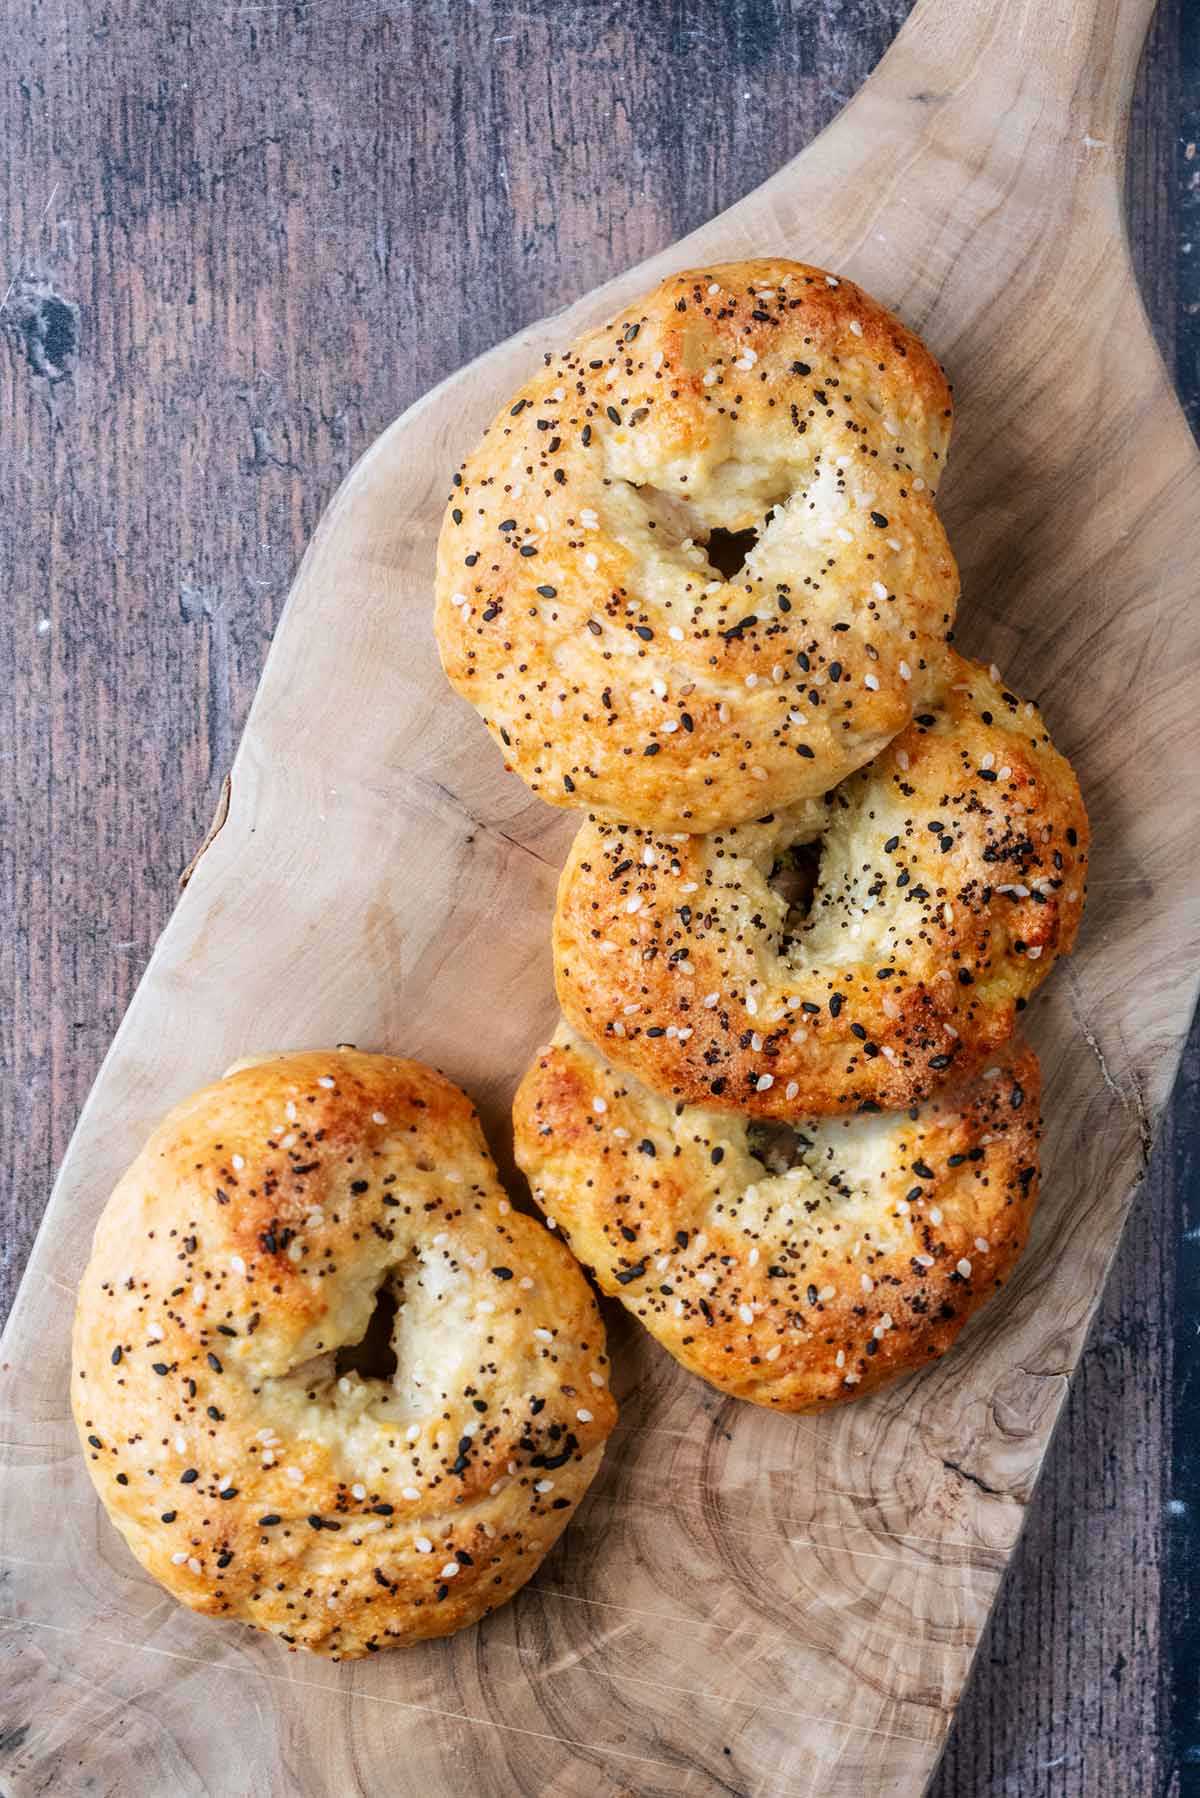 Four bagels topped with sesame seeds on a wooden serving board.